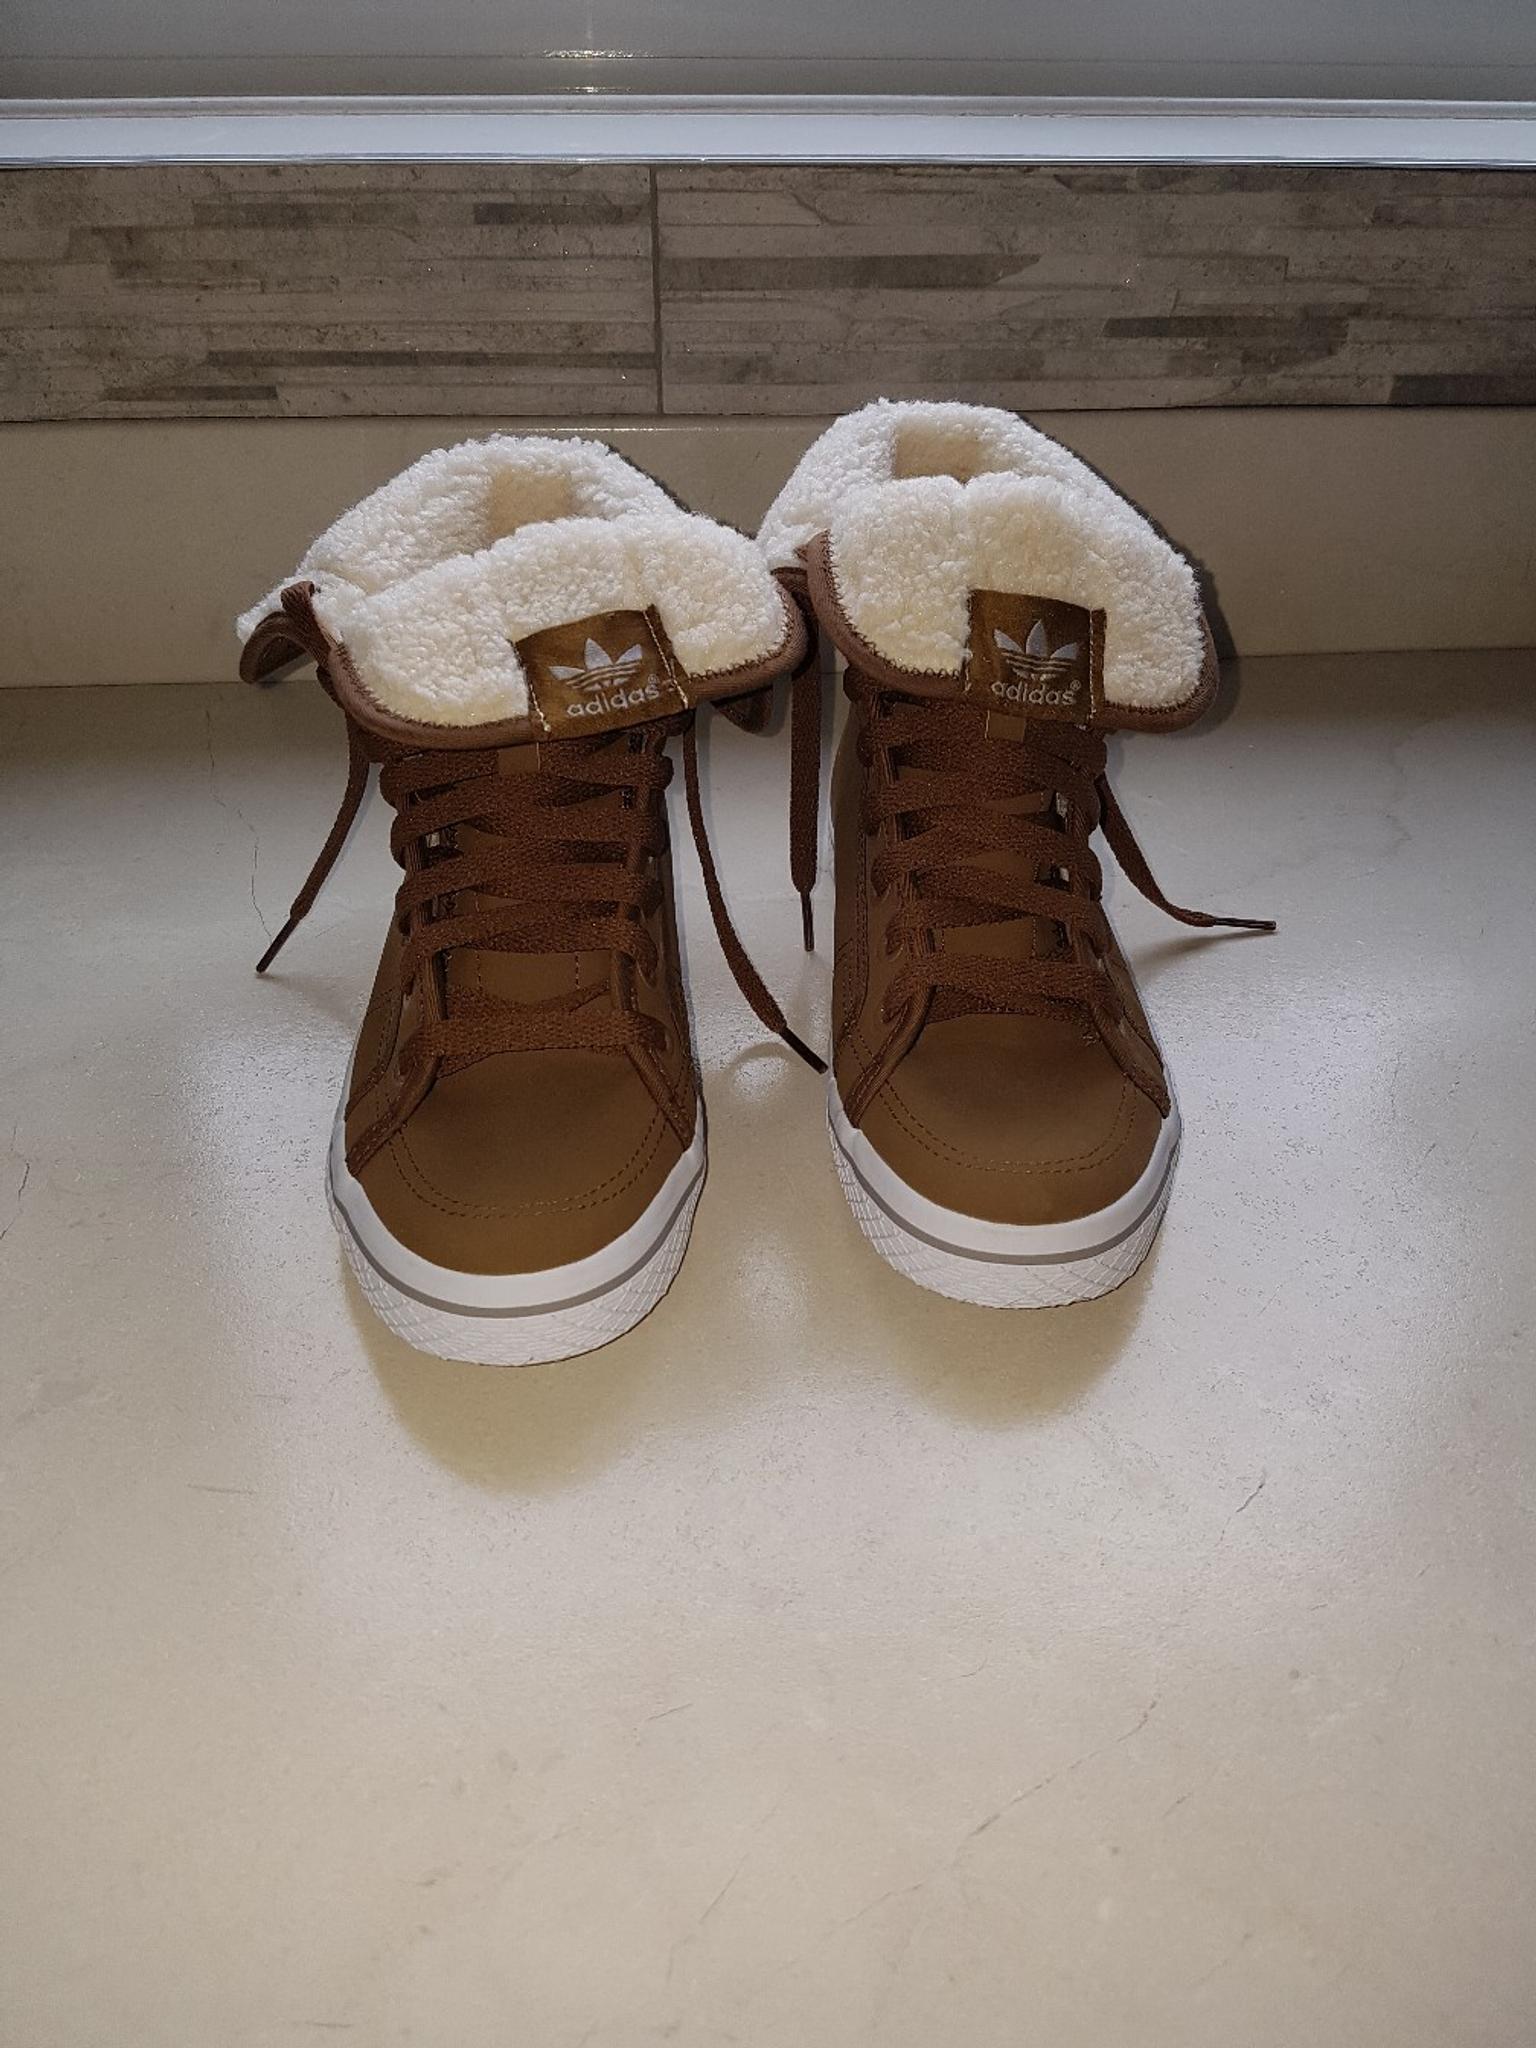 adidas boots with fur trim